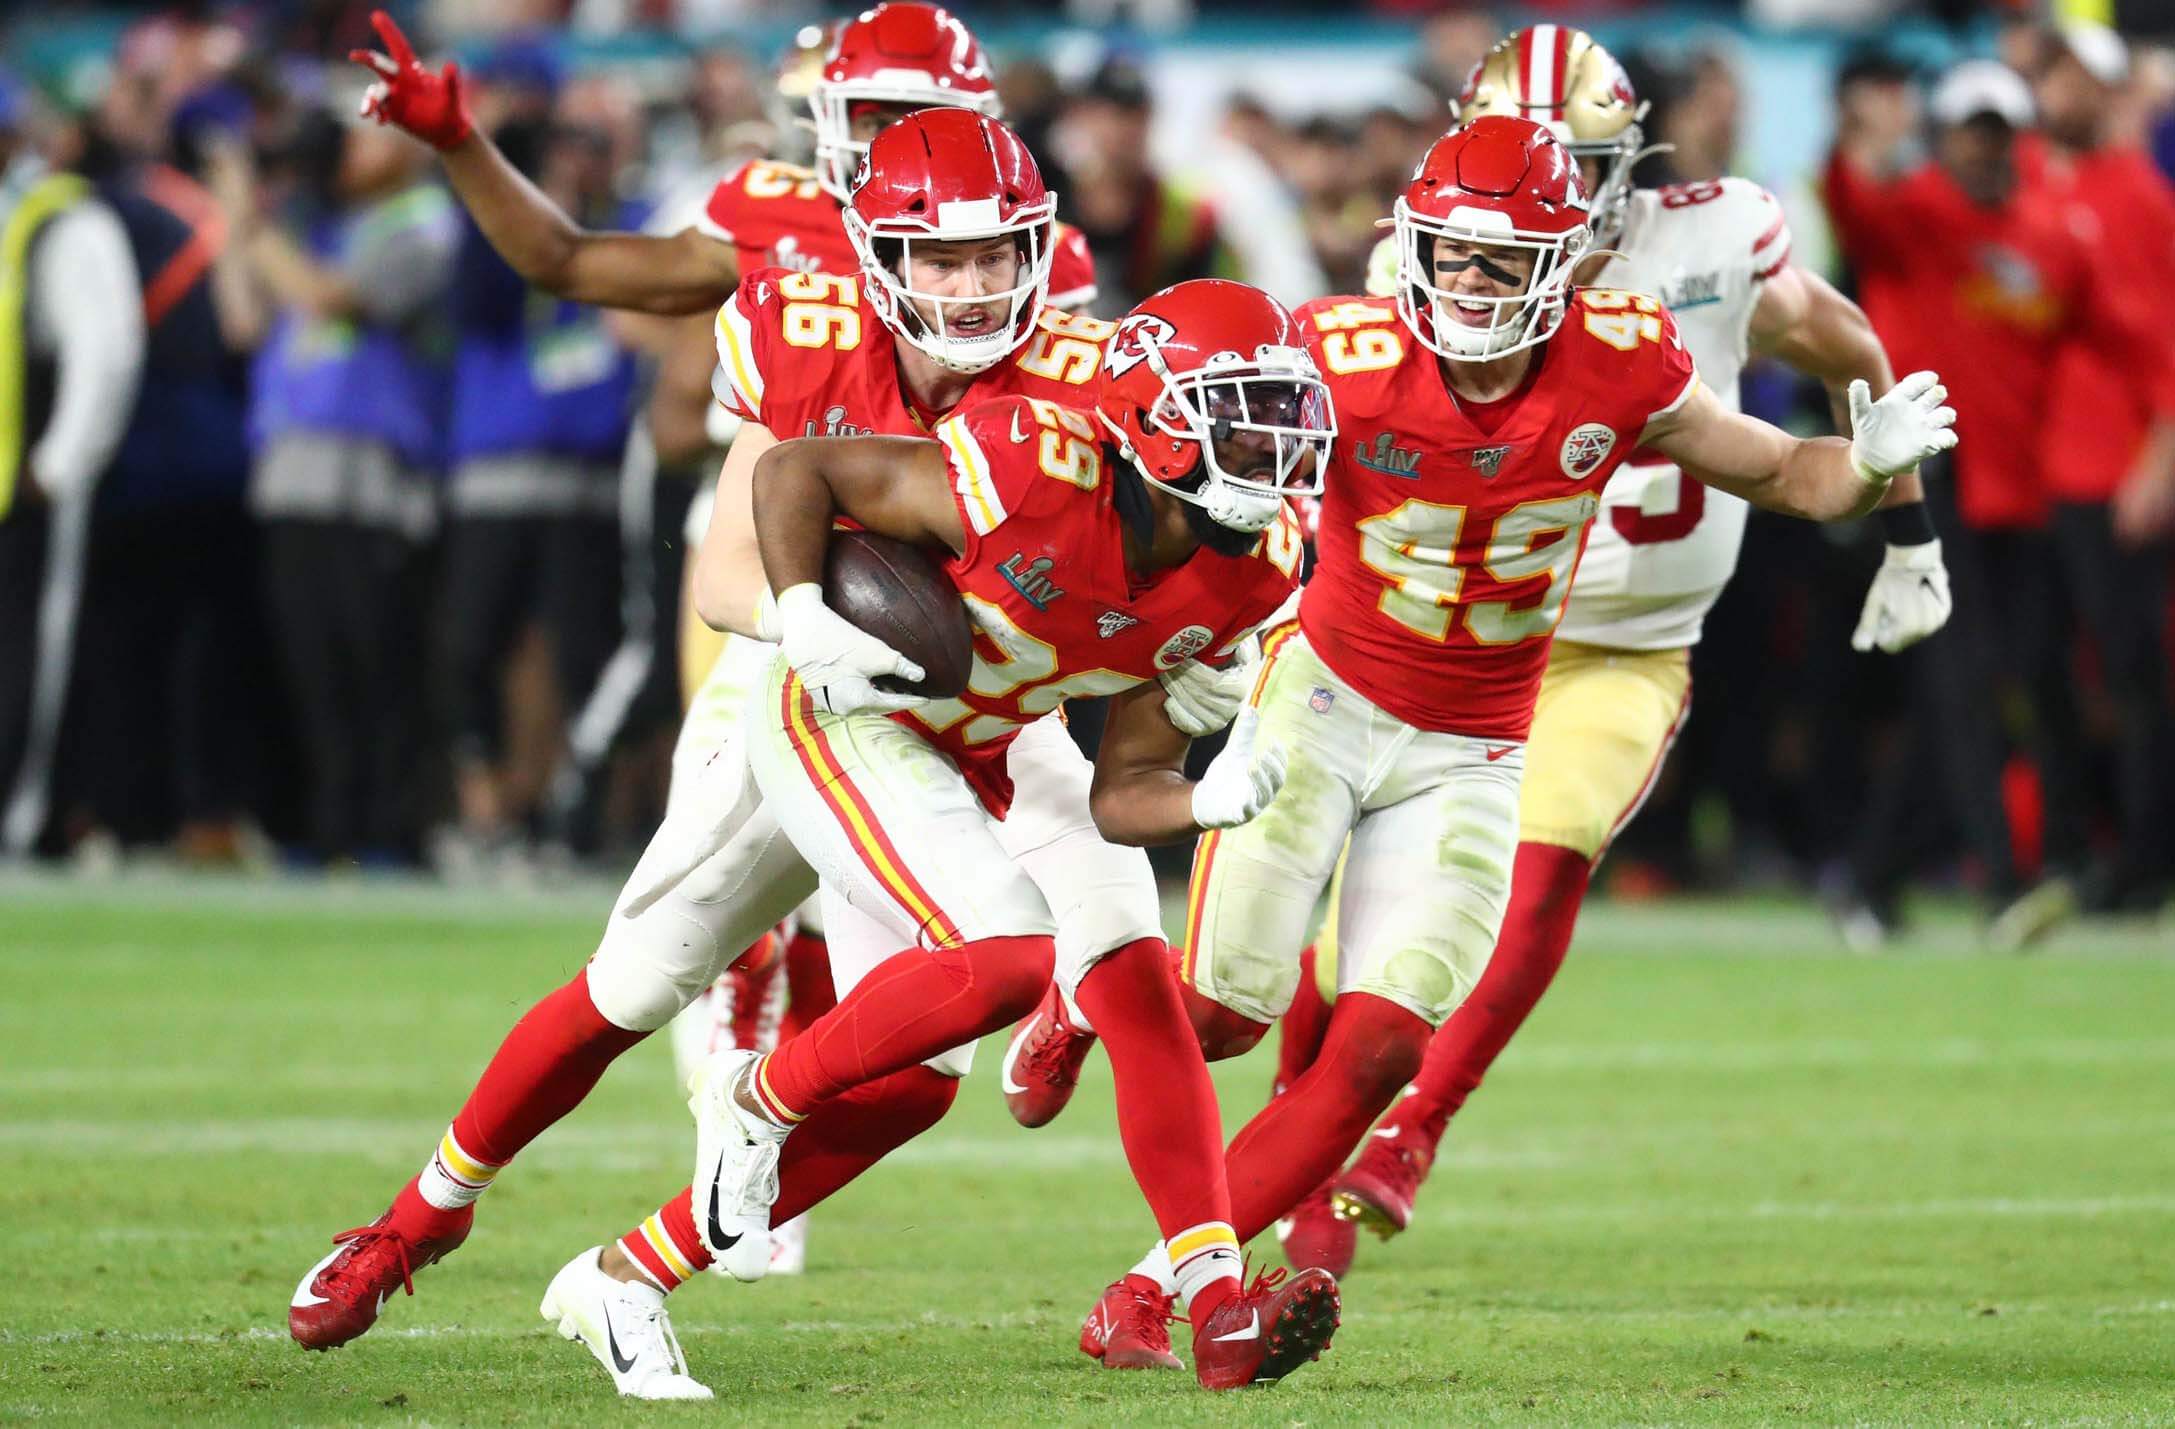 Kansas City Chiefs cornerback Kendall Fuller (29) celebrates with teammates after an interception against the San Francisco 49ers in the fourth quarter in Super Bowl LIV at Hard Rock Stadium.